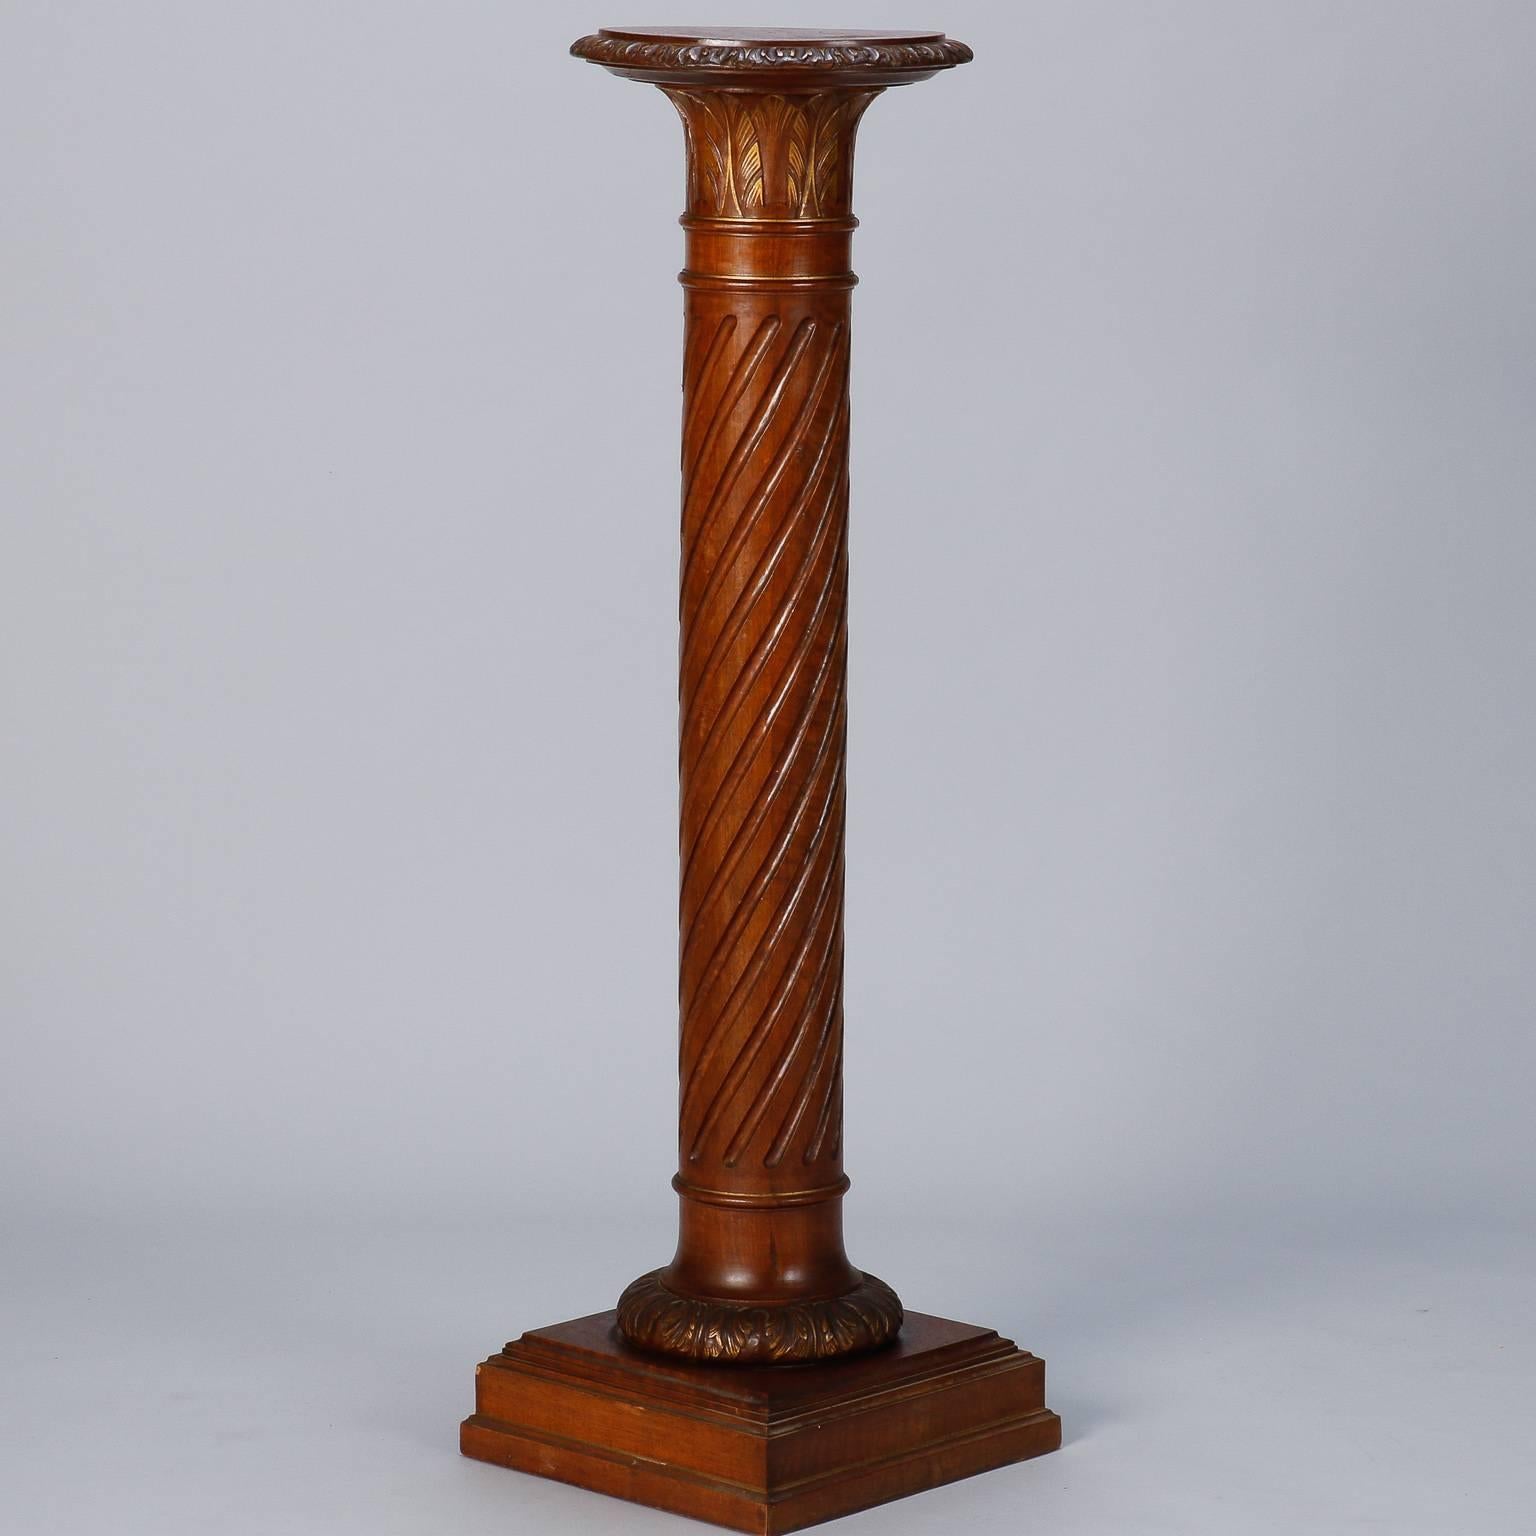 Classic column form stand made of wood with stepped pedestal base and twisted reeded surface to column. Leaf form carved details appear to support table top which also has a decorative carved edge. Great piece to display a plant, sculpture or piece